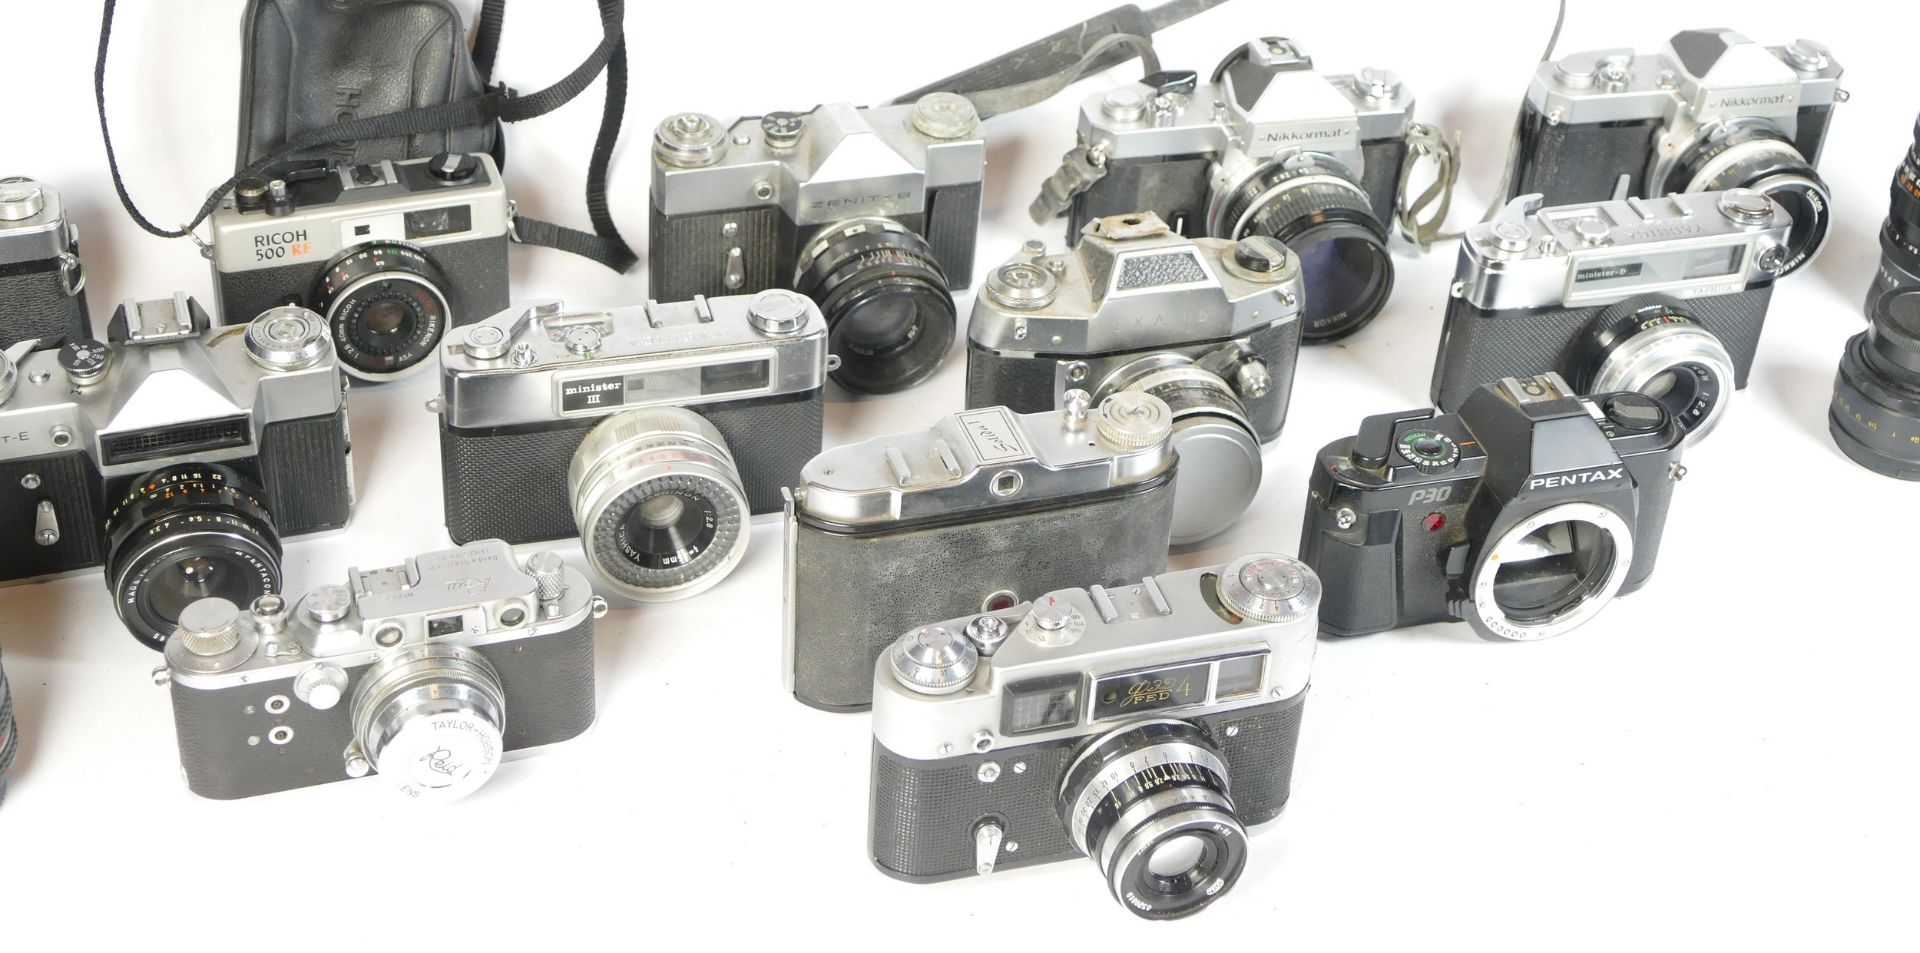 Thirteen SLR vintage film cameras to include a Zenit B, an EXA IIb, a Kowa SE, and a Ricoh 500RF. - Image 2 of 3